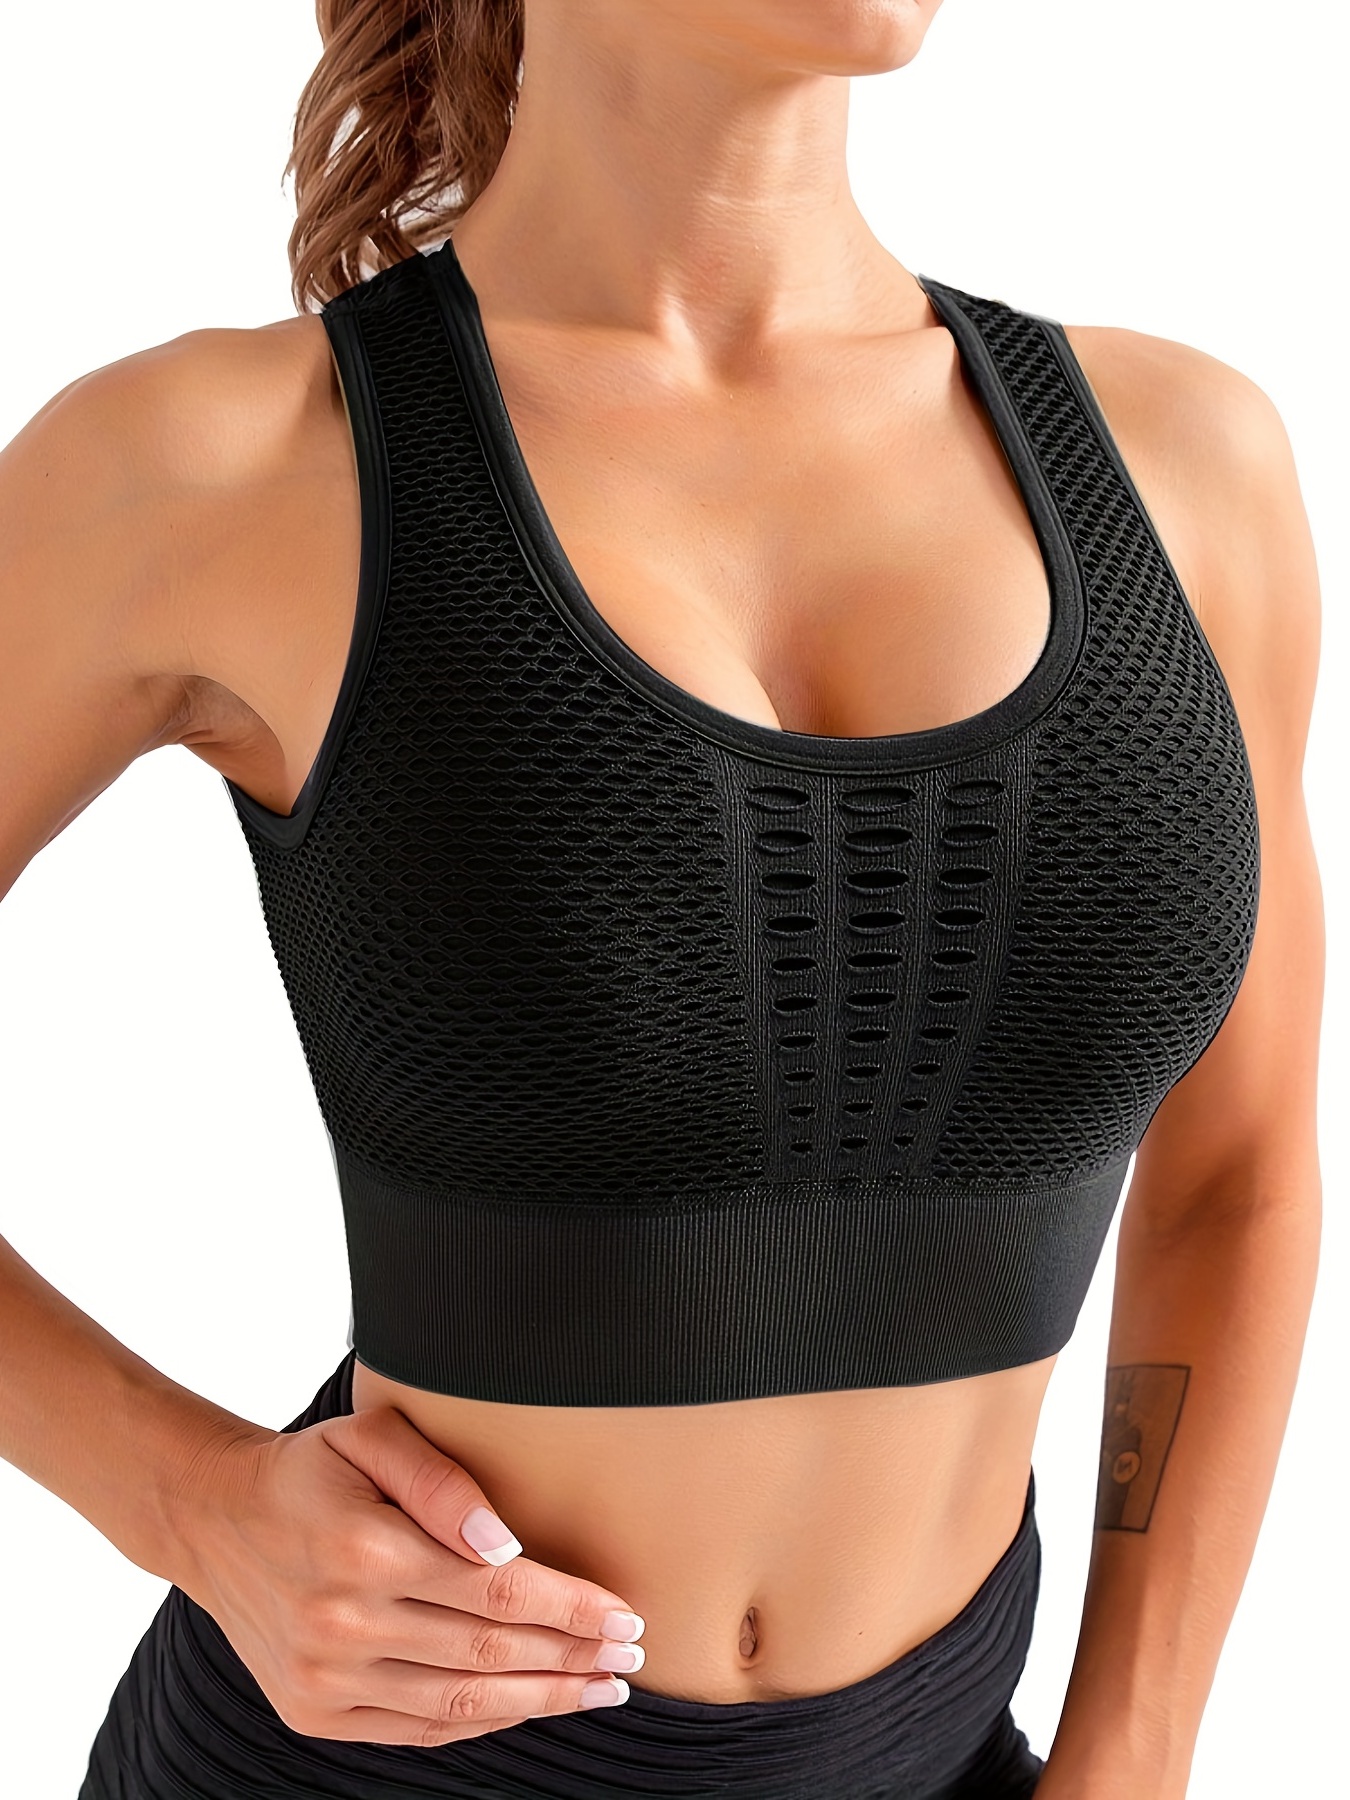 Women Sports Bra With Front Zip Yoga Push Up Vest Support Padded Vest Tops  Girls